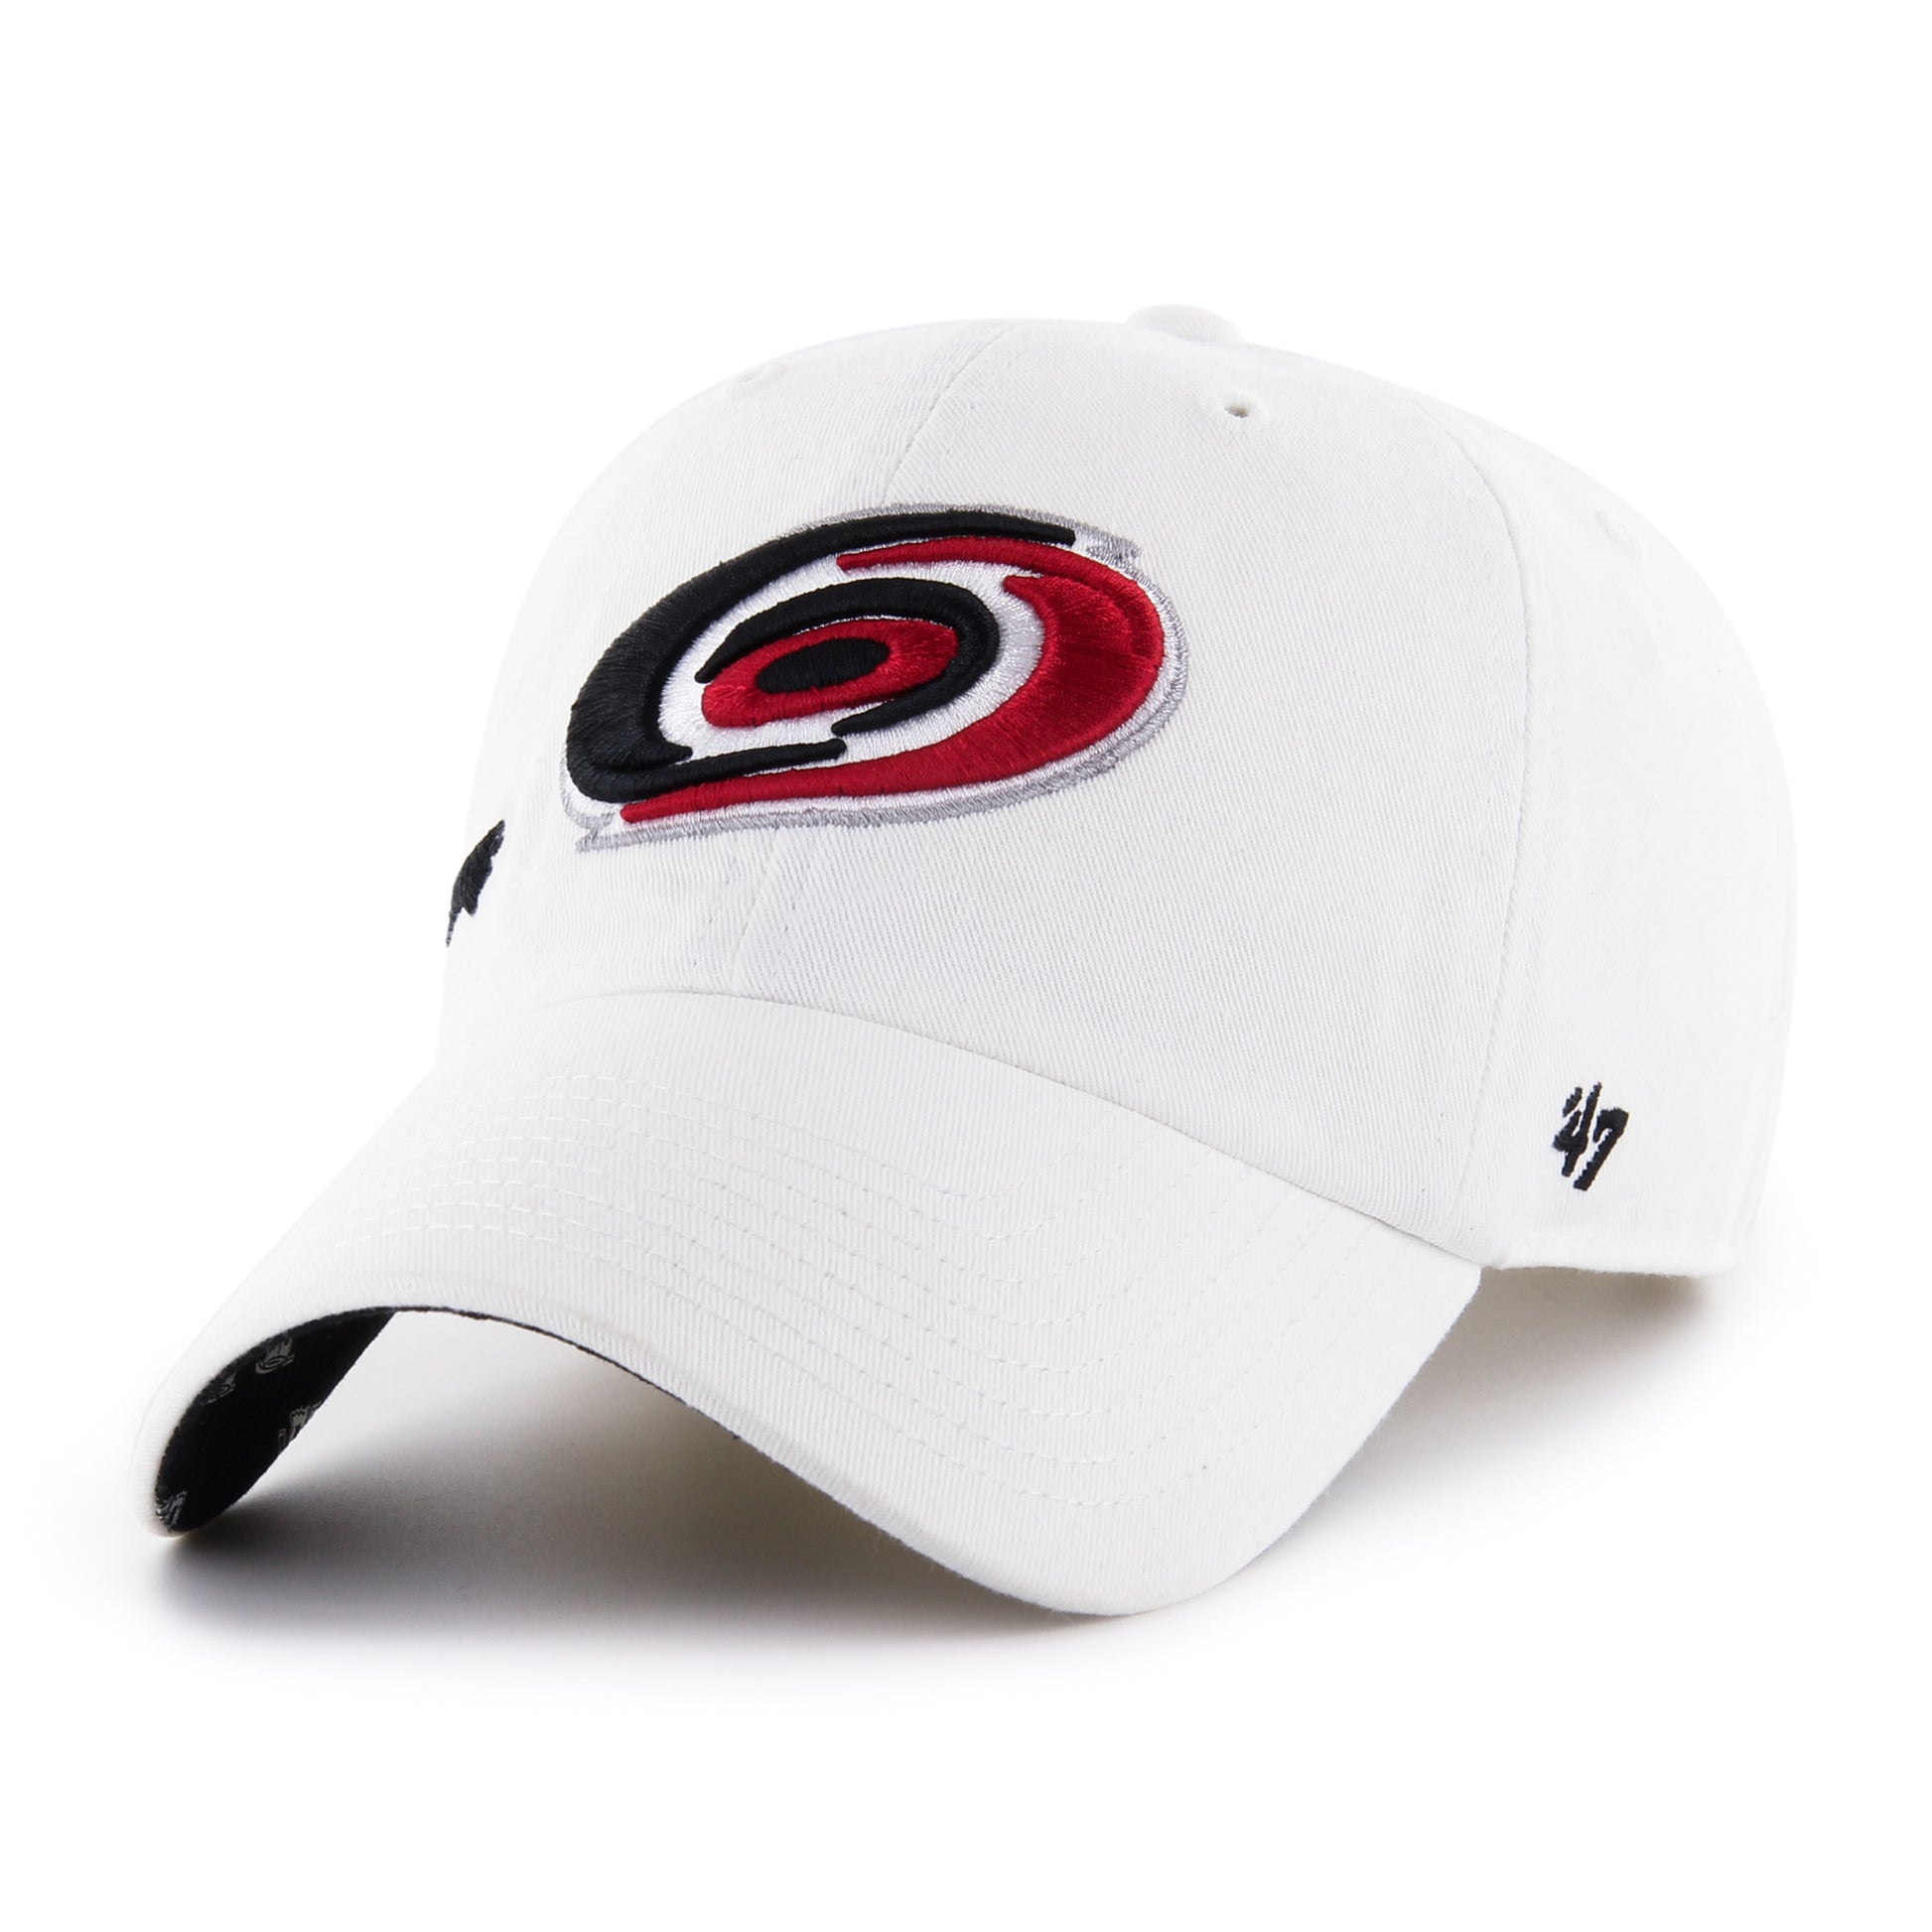 Front View: Hurricanes primary logo and the '47 brand logo on the side of the hat.